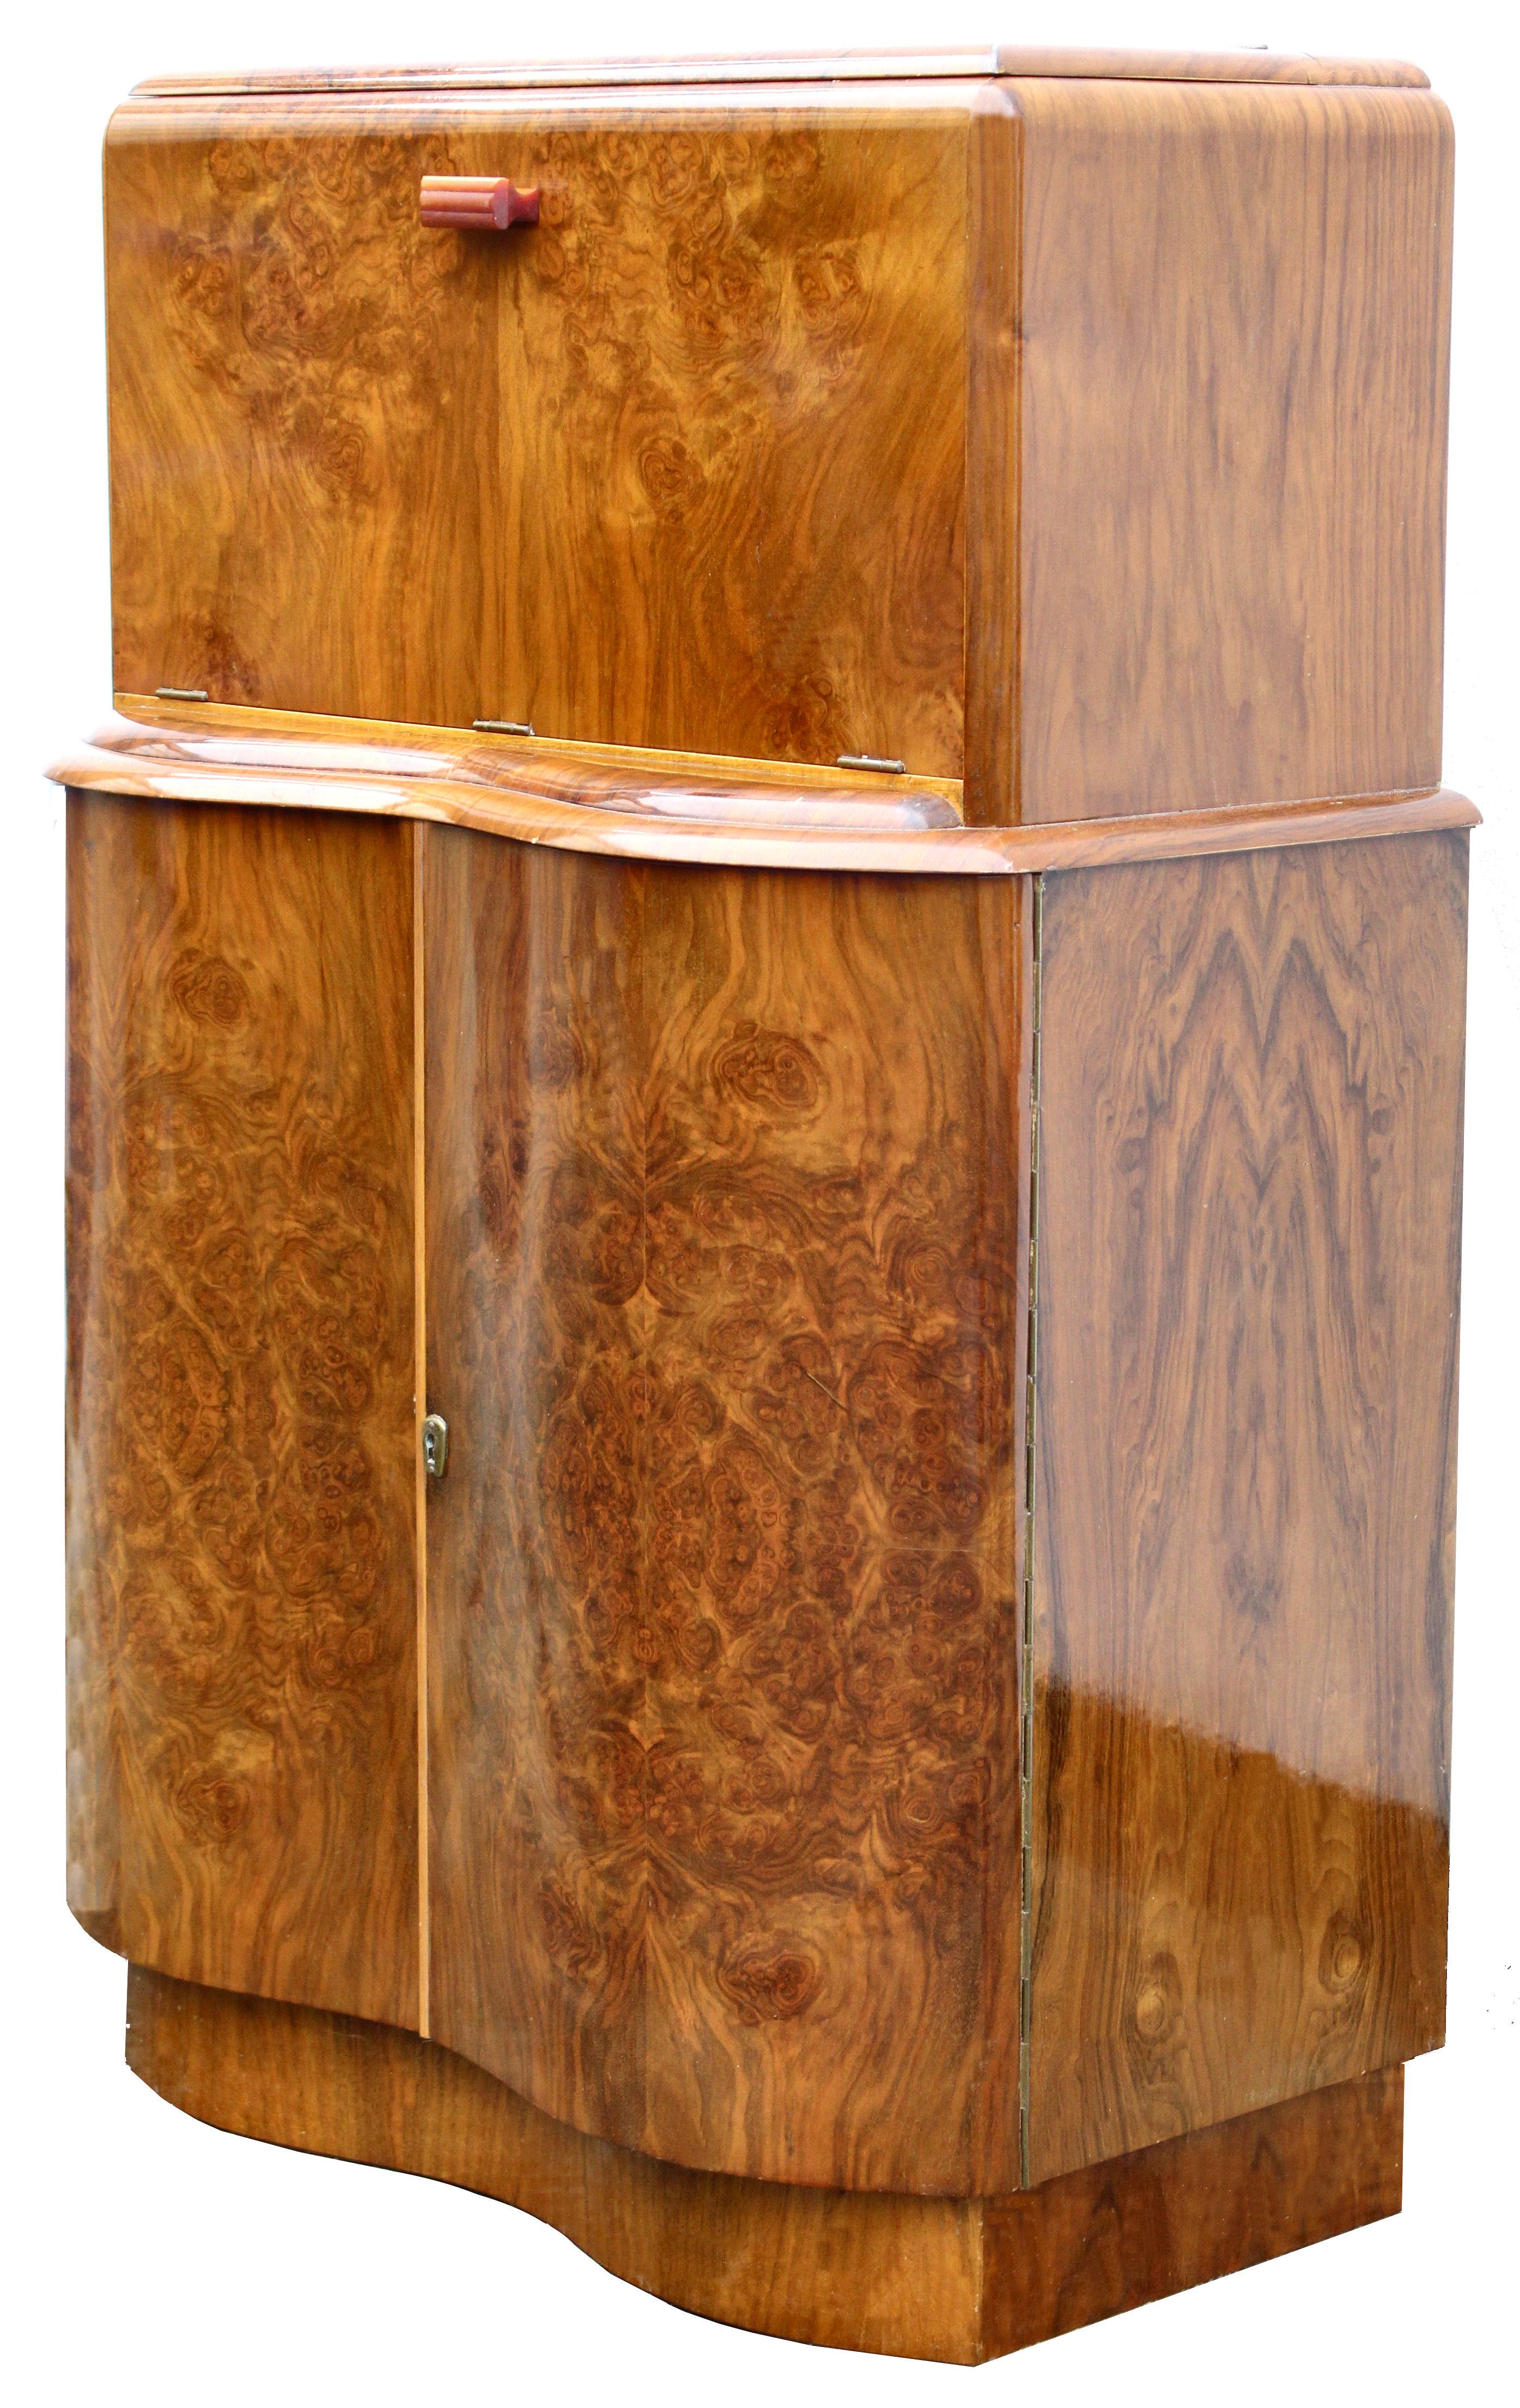 Beautiful 1930s Art Deco walnut serpentine shaped cocktail cabinet in gorgeous figured veneers, every Deco interior should have one of these! Features a drop down top which reveals an all mirrored interior which acts as storage for glasses. Still